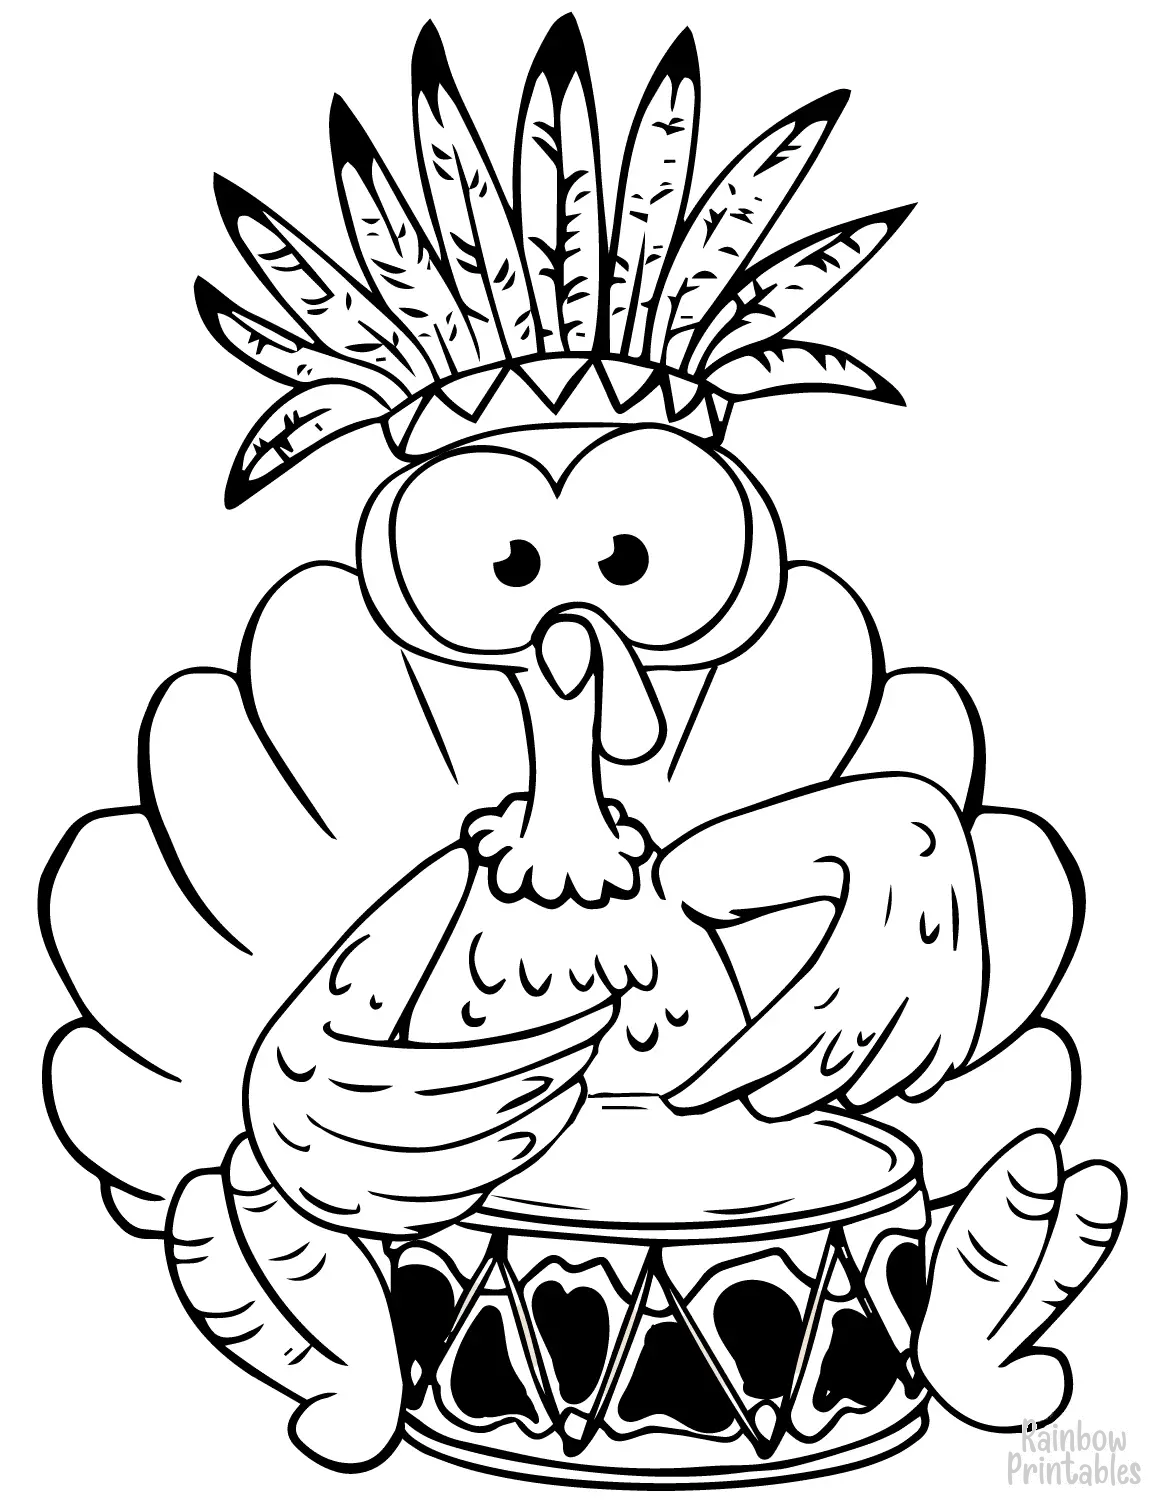 DRUMMING INDIAN TURKEY ANIMAL Clipart Coloring Pages for Kids Adults Art Activities Line Art